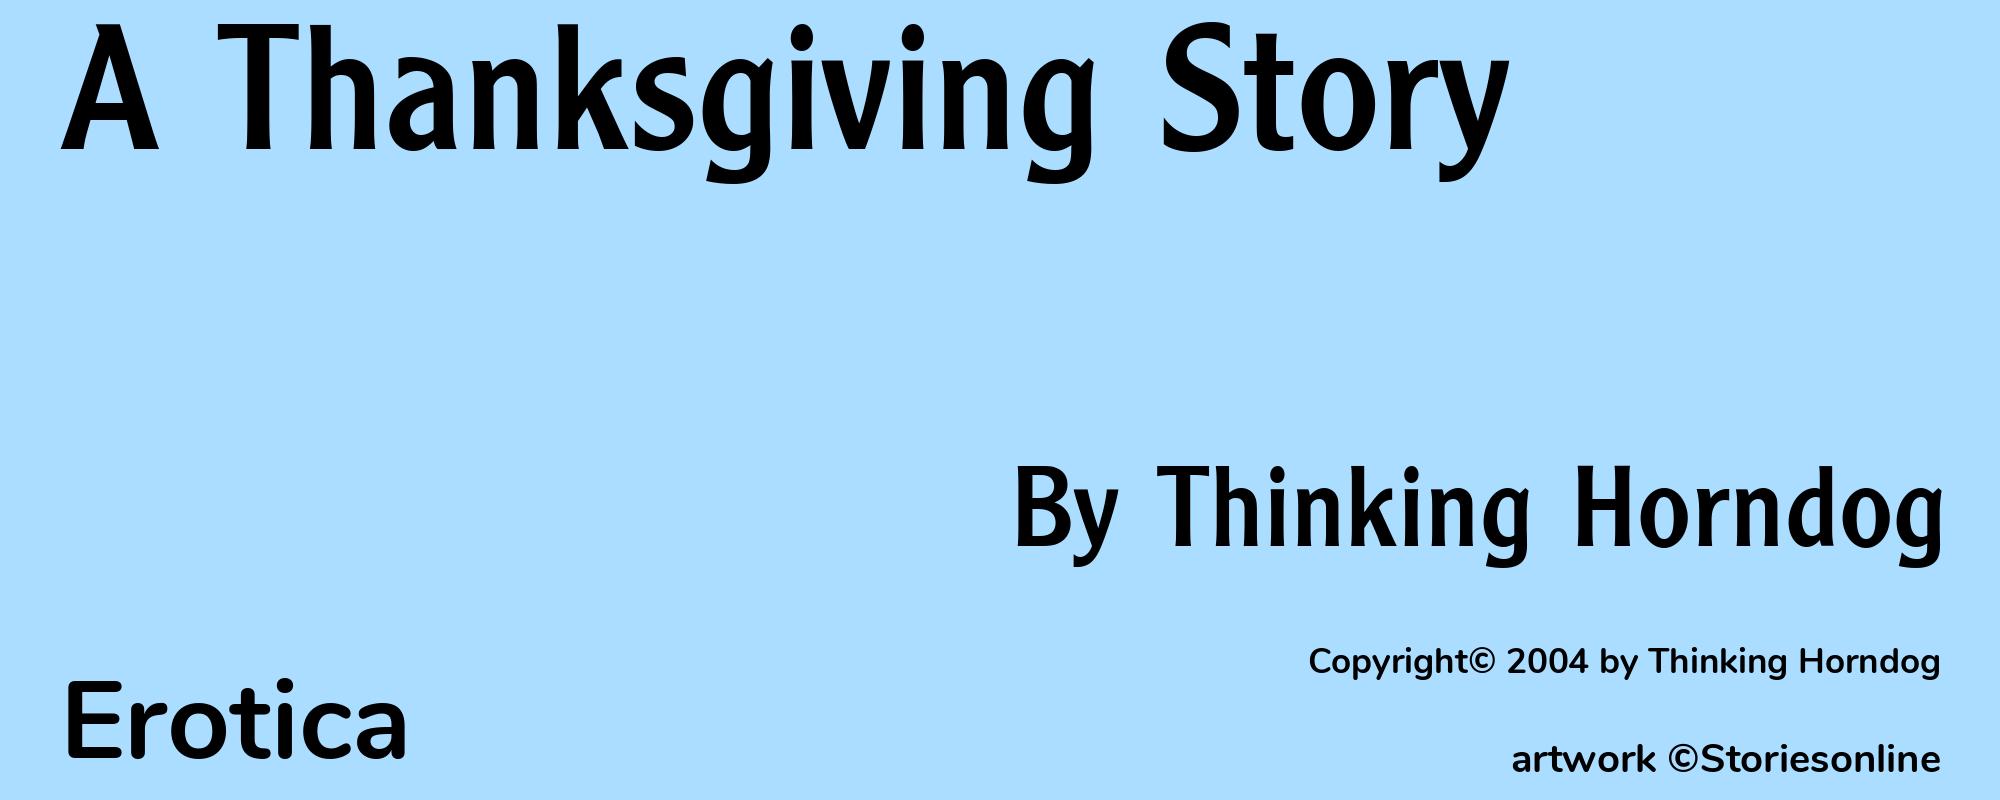 A Thanksgiving Story - Cover